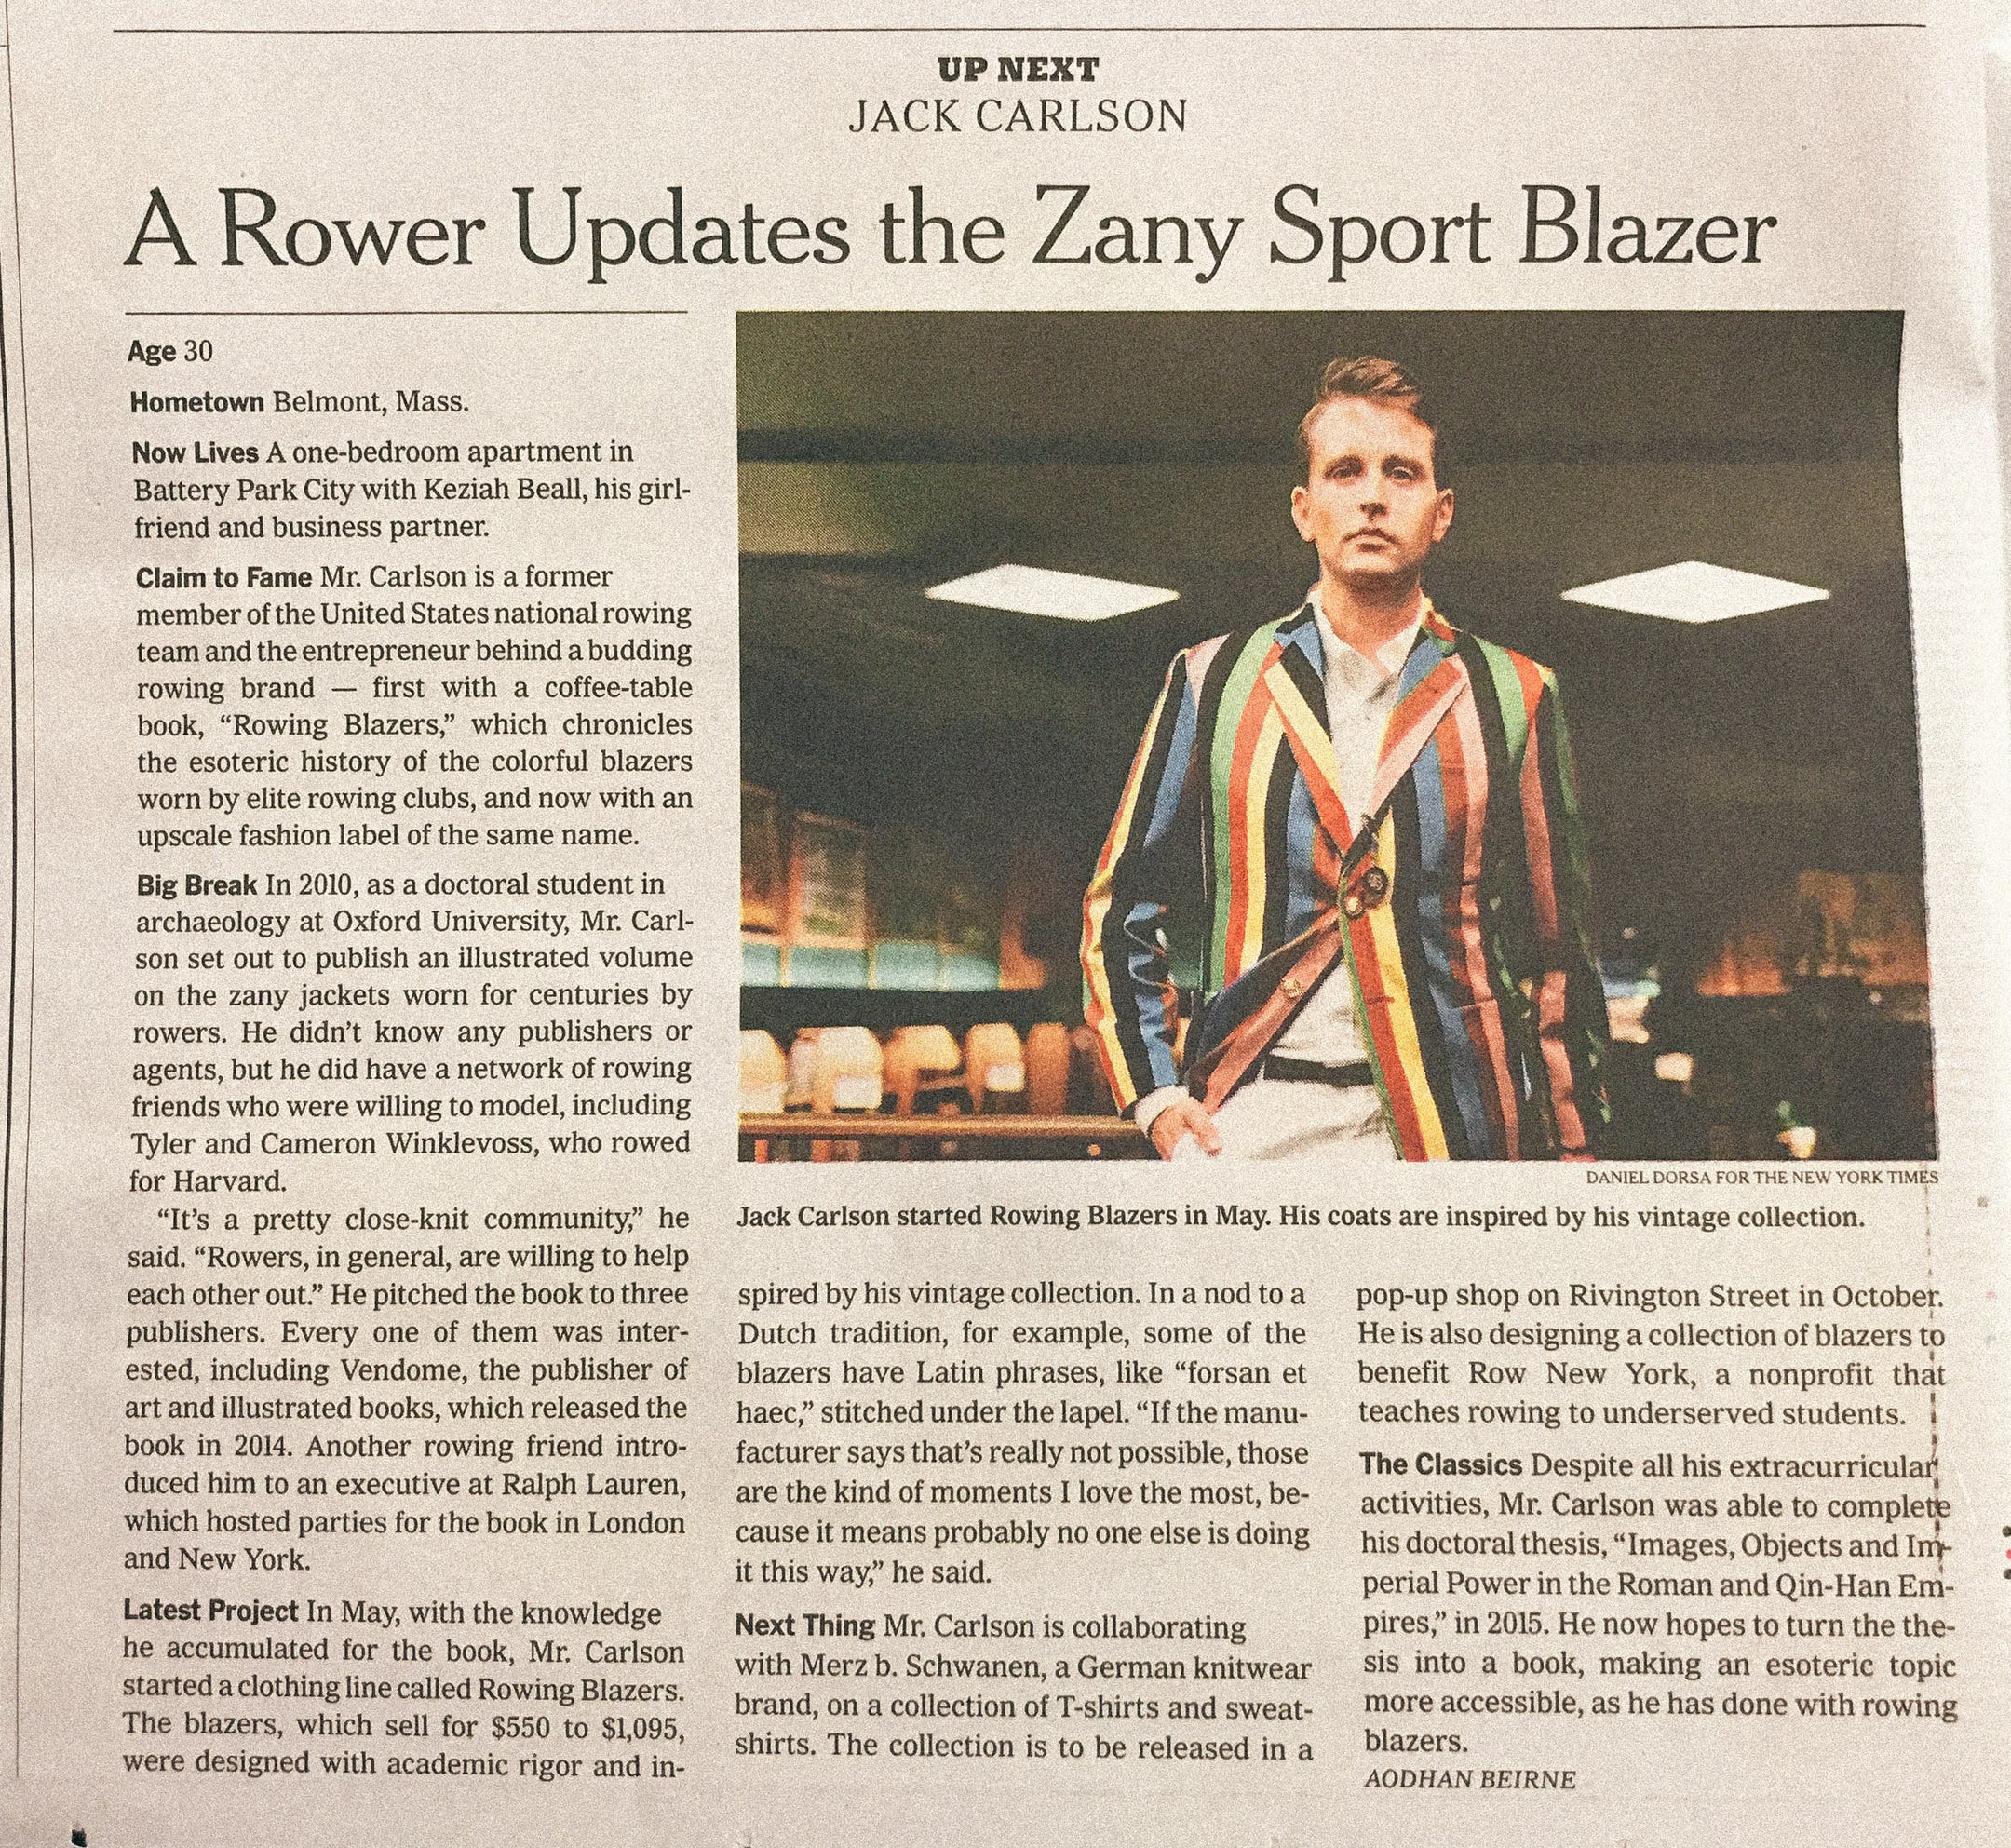 All The News That's Fit To Print! (Rowing Blazers in the New York Times)